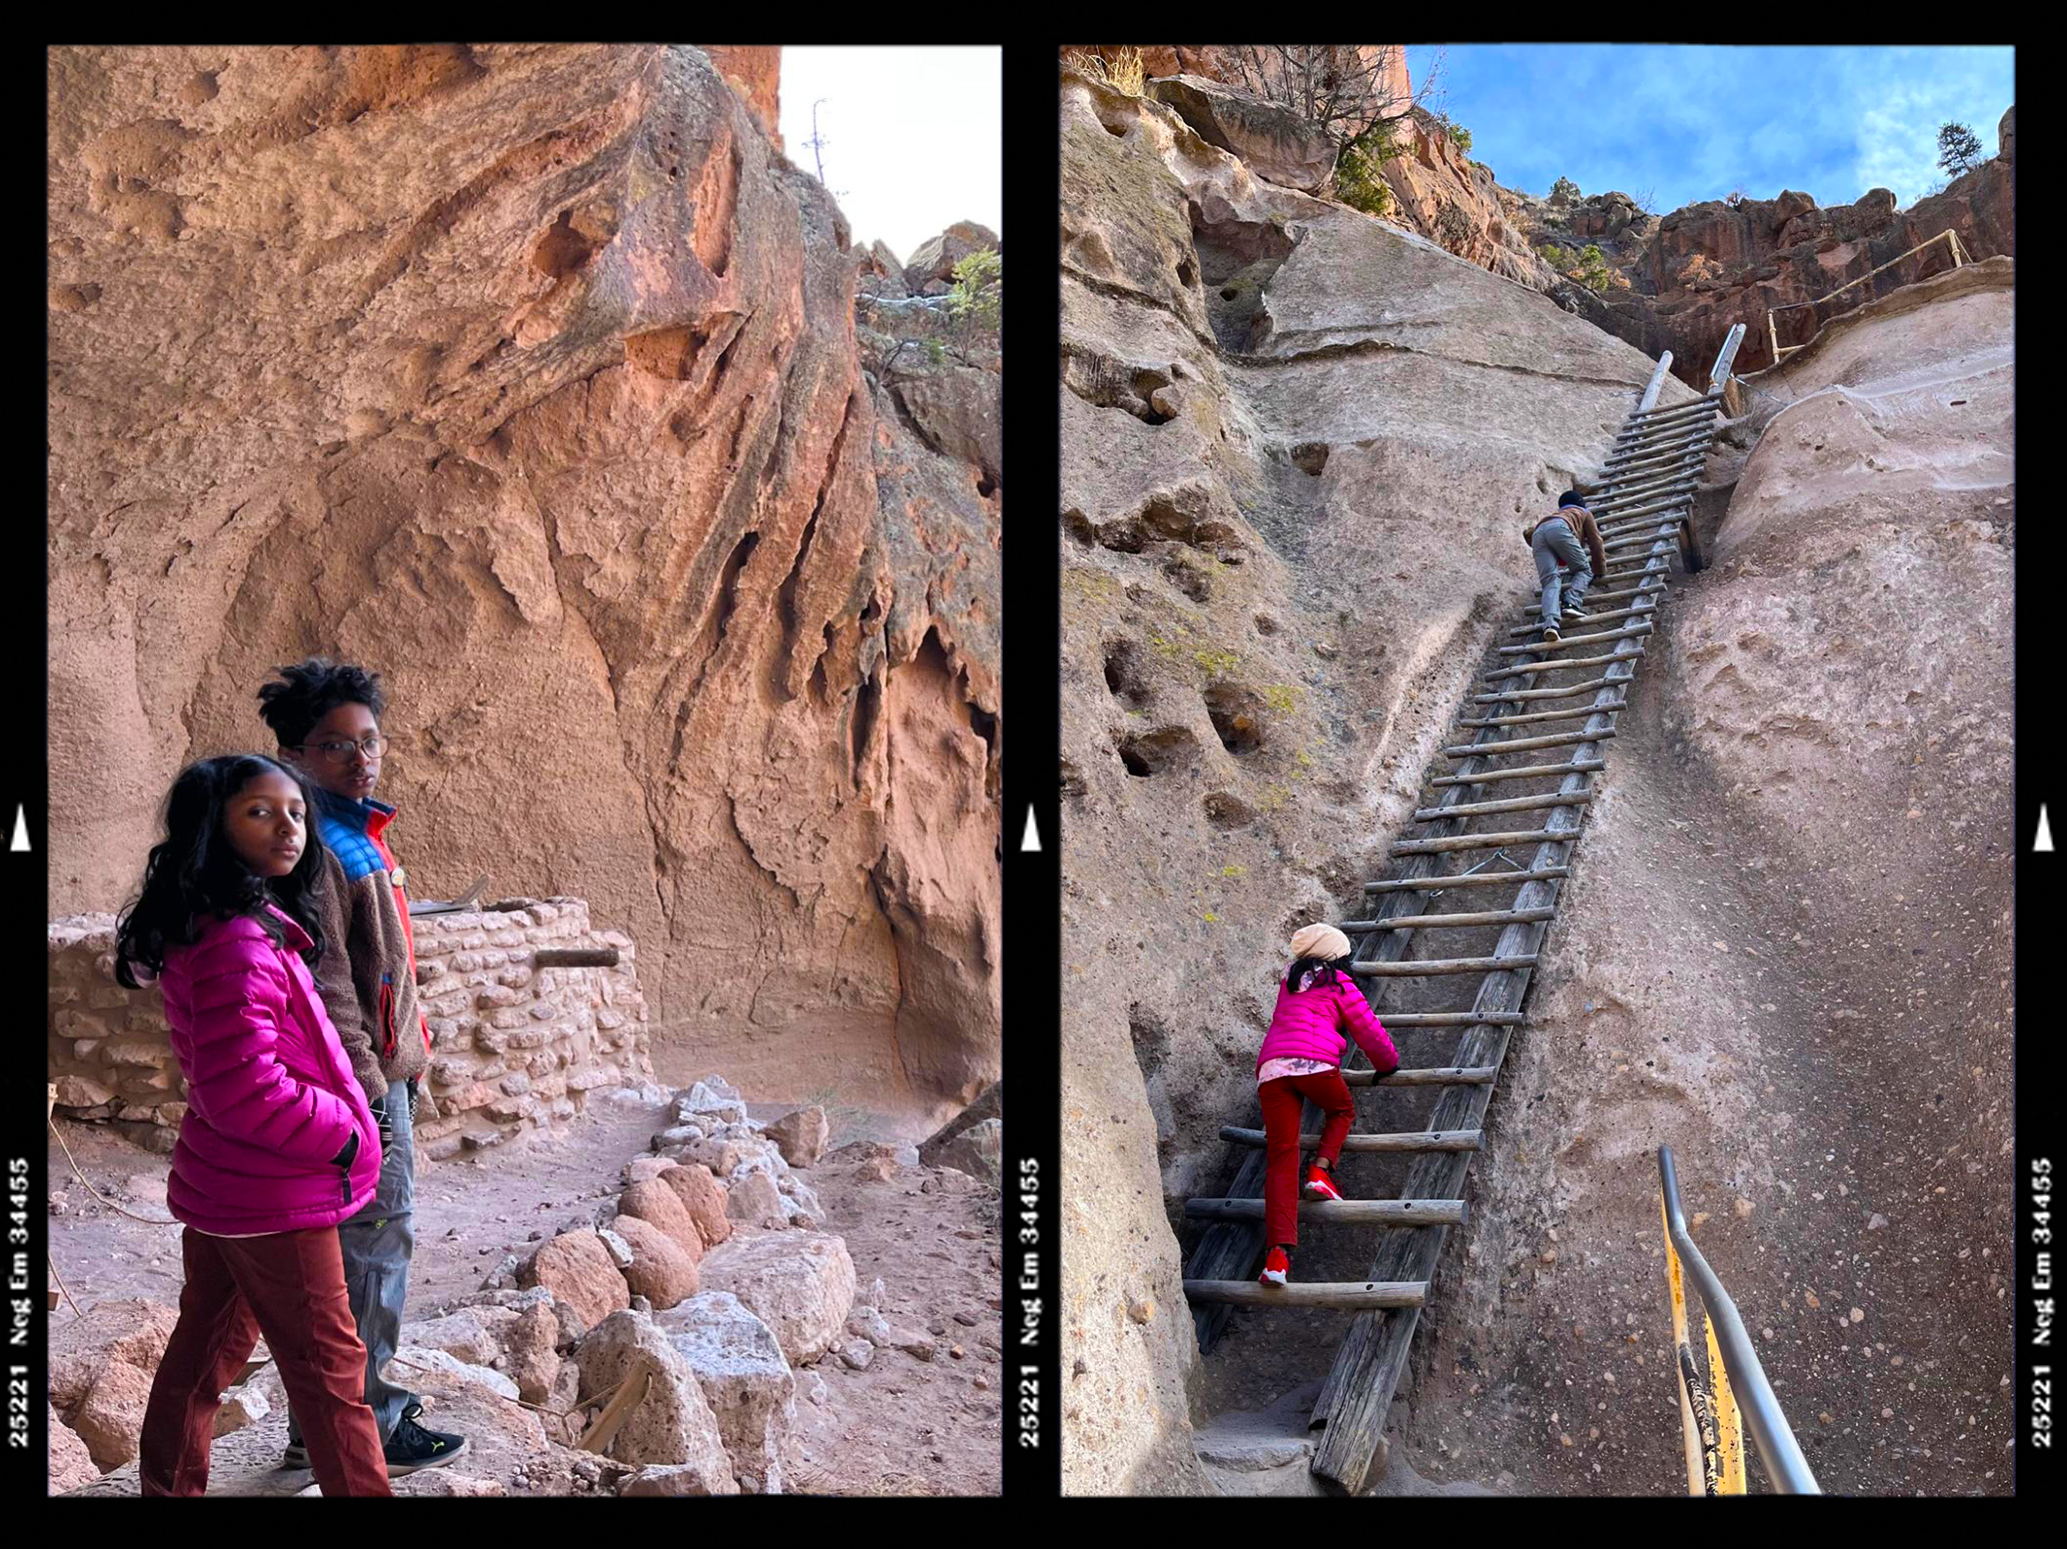 Children climbing the steps in Bandelier National Monument